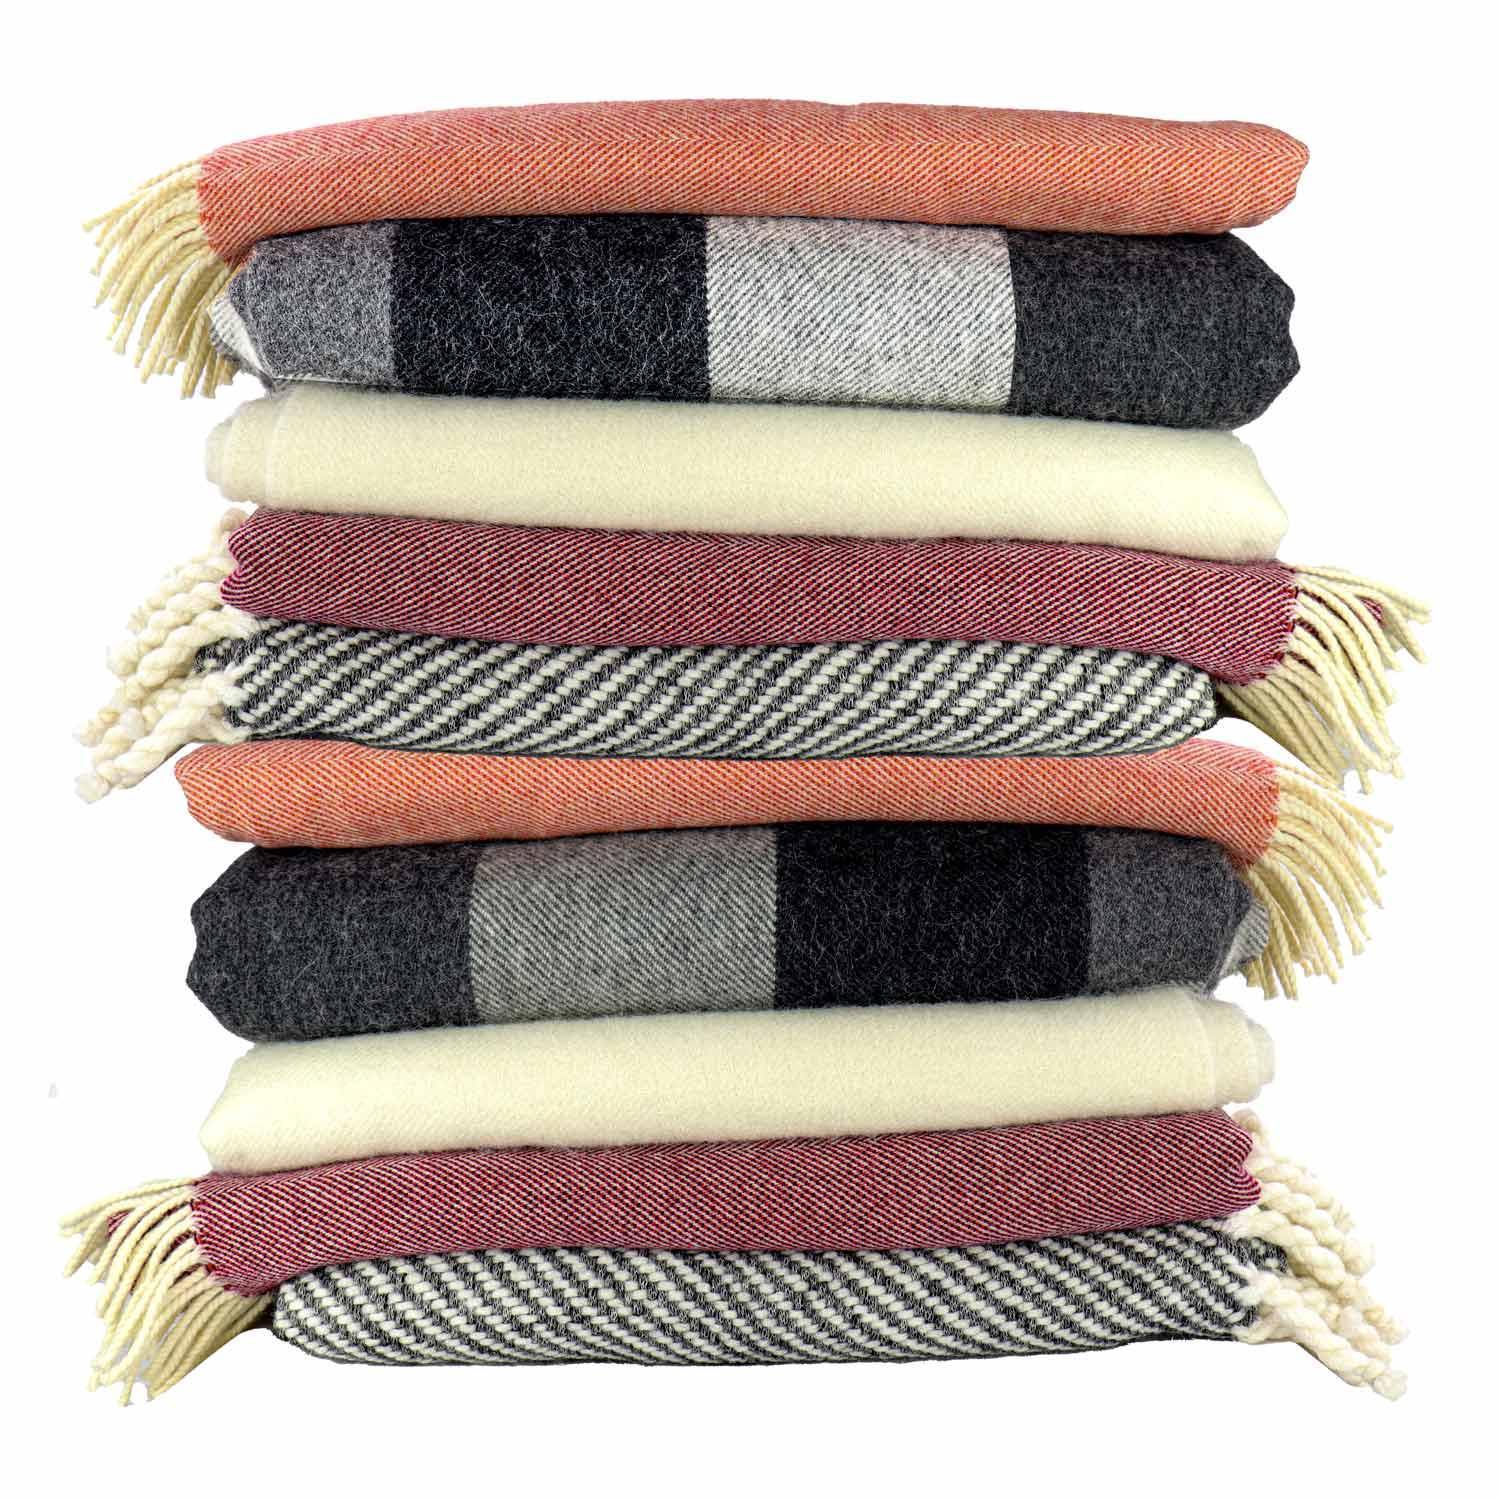 Red and White Throw Blanket  Harlow Henry Throws & Blankets.